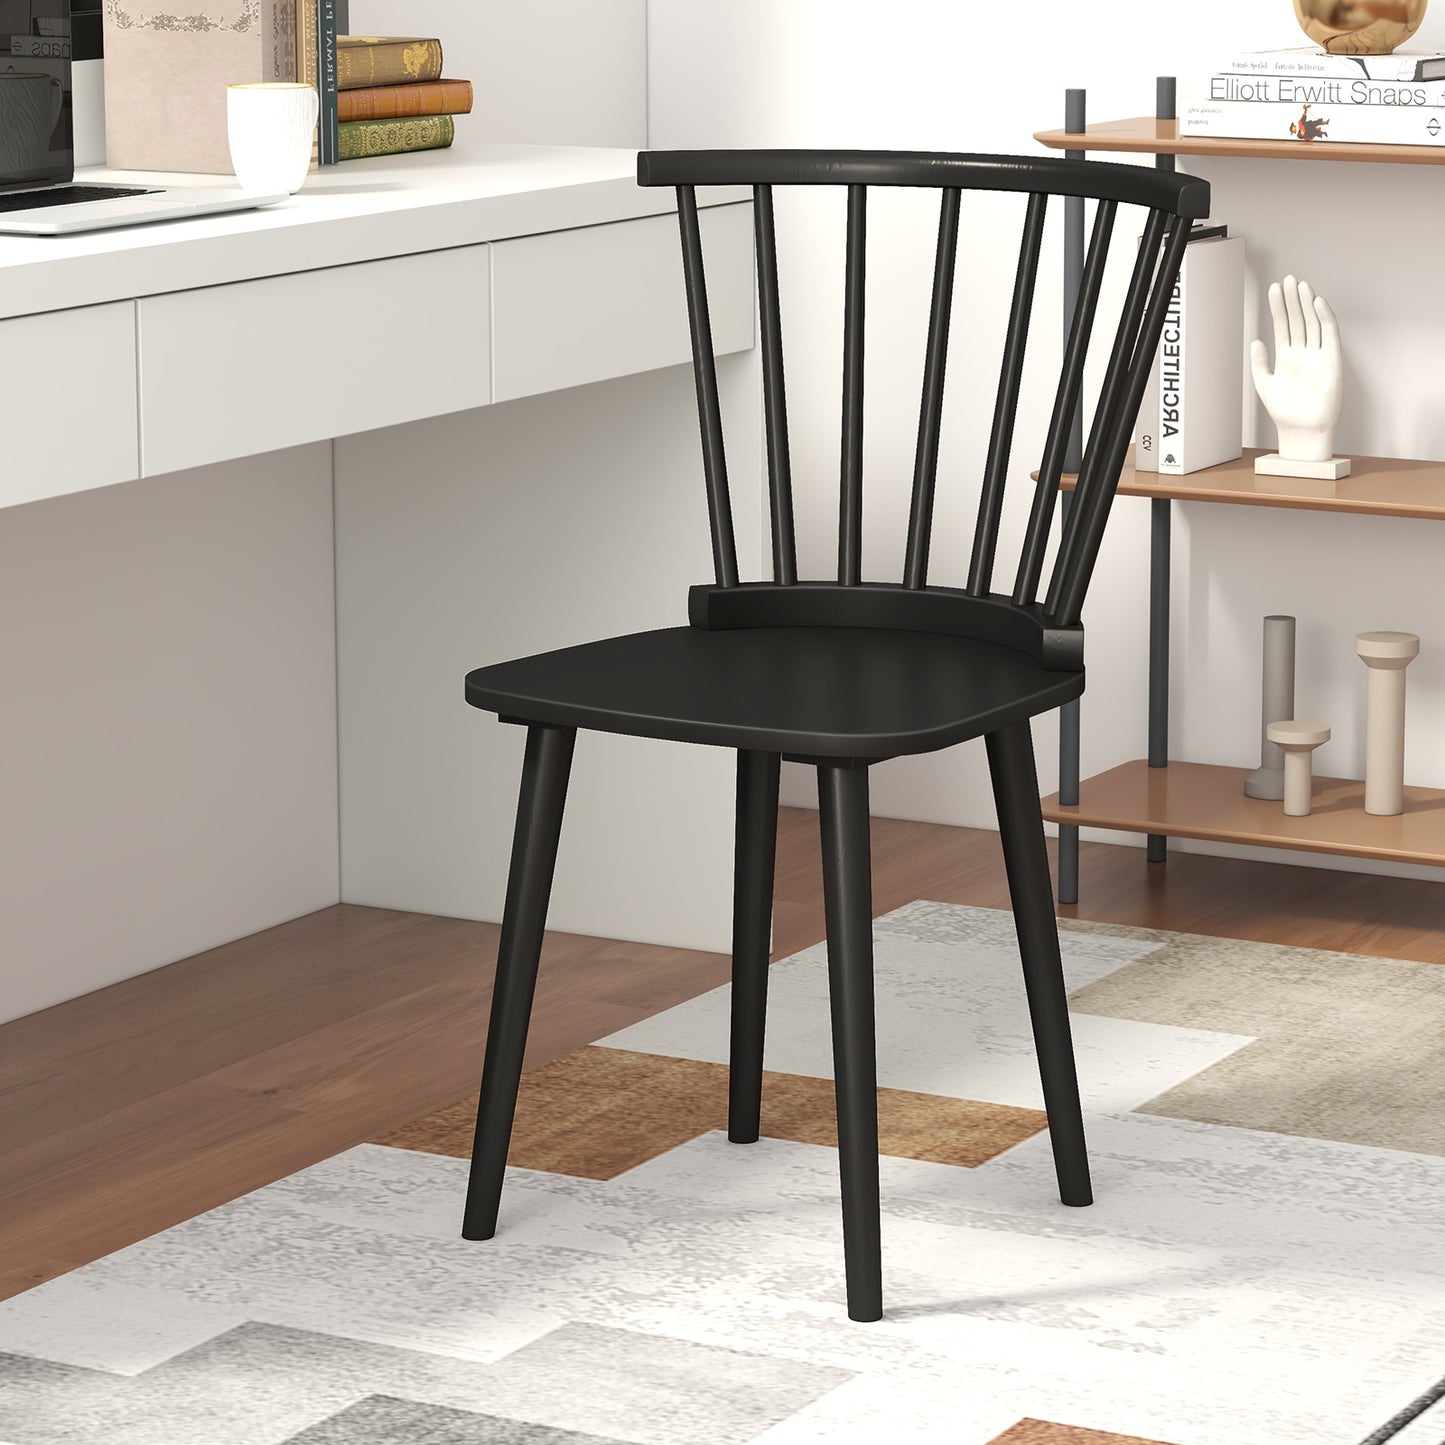 Windsor Dining Chairs Set of 2 Rubber Wood Kitchen Chairs with Spindle Back-Black